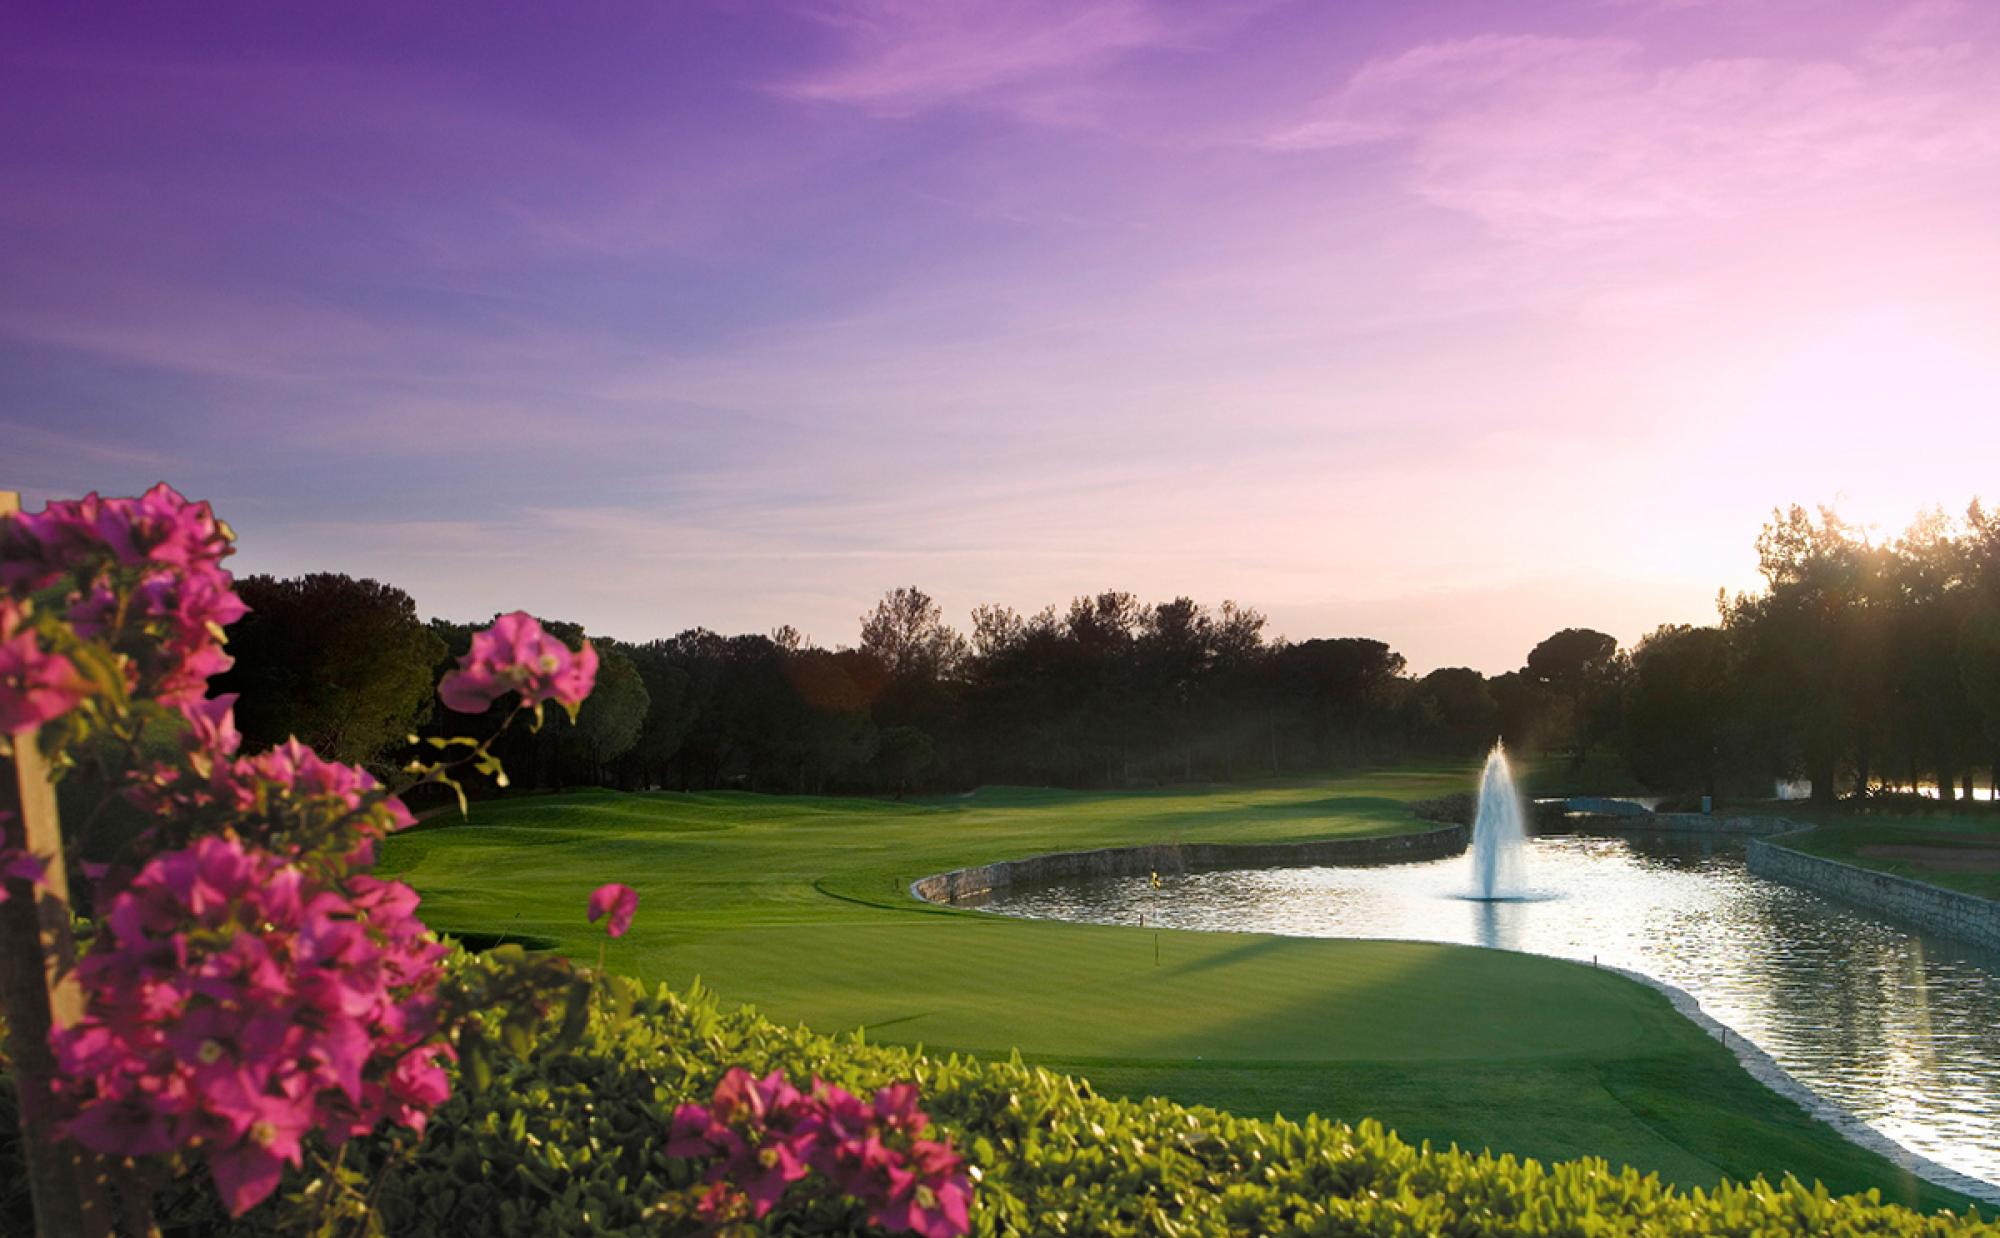 The National Golf Club's impressive golf course situated in pleasing Belek.